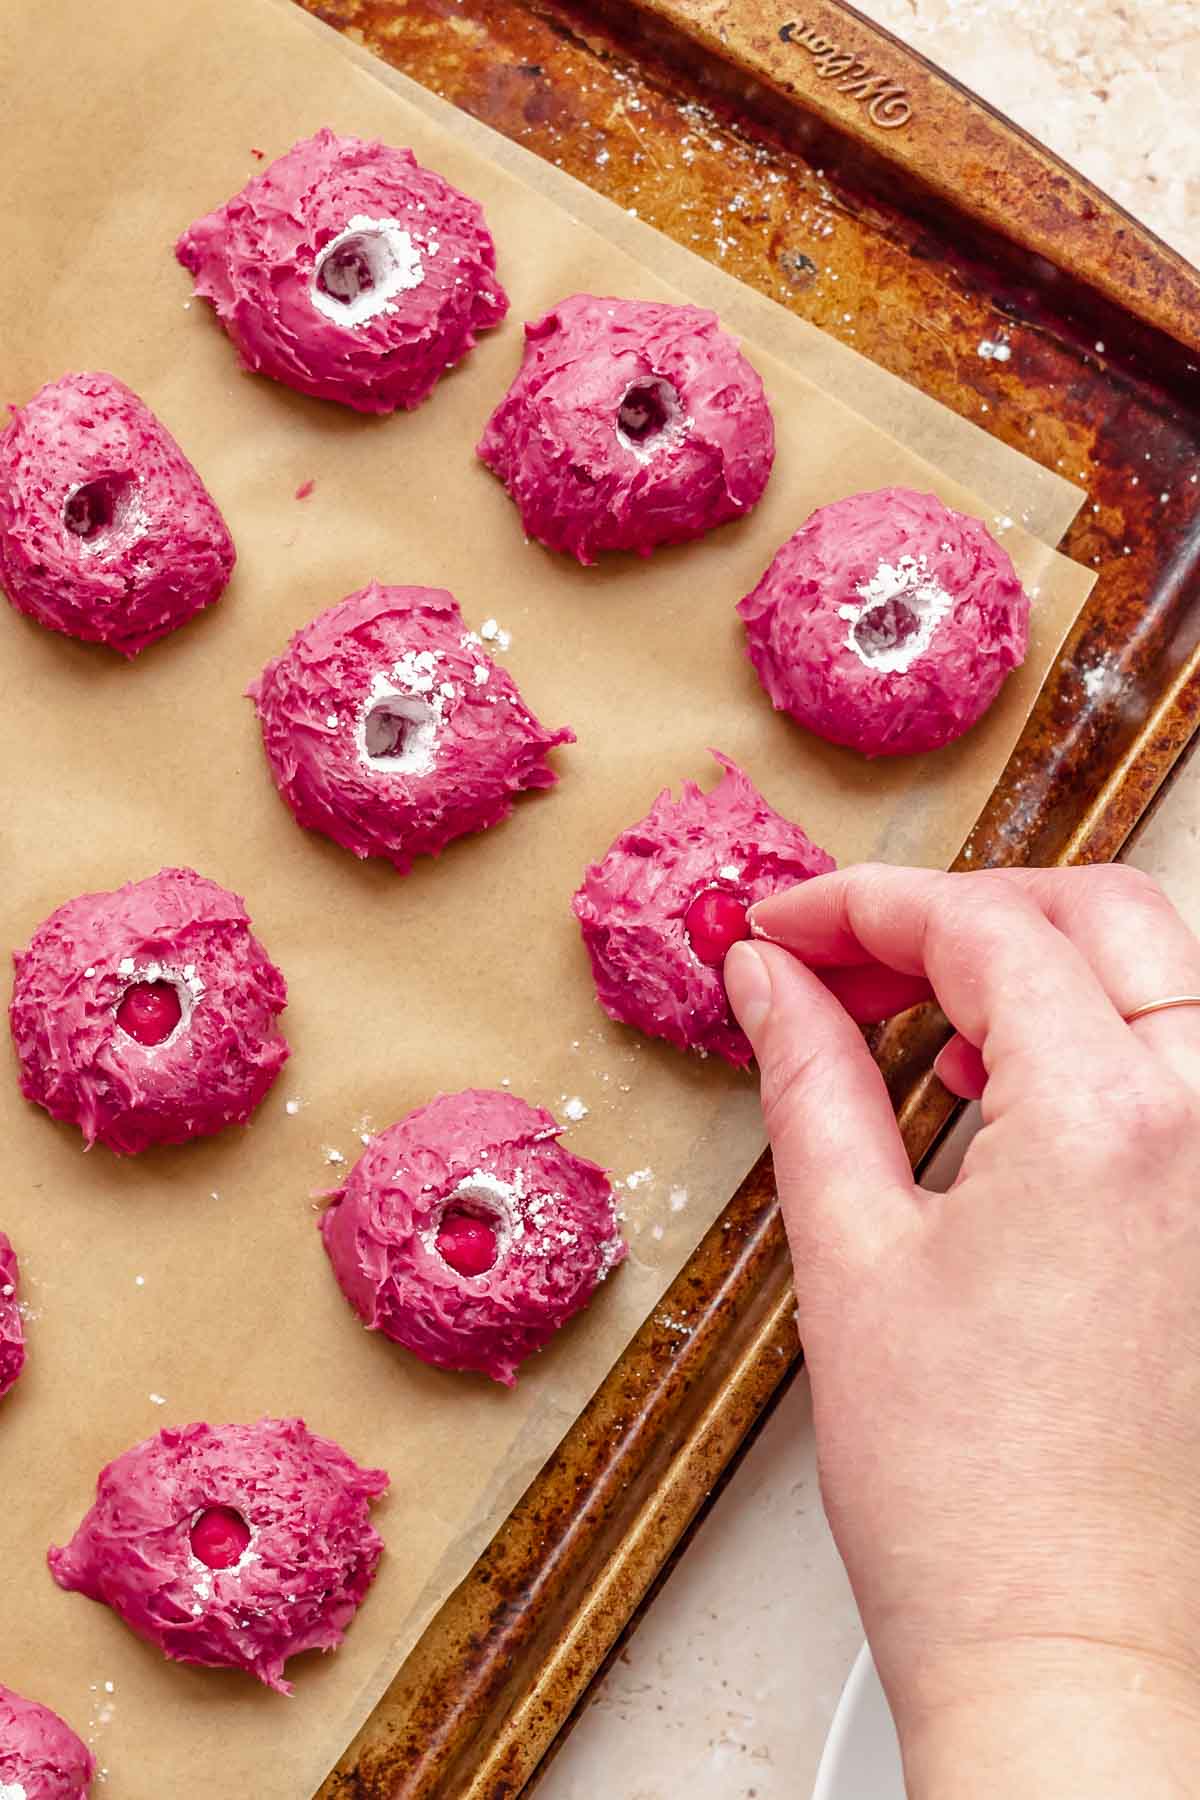 A hand adds frozen dollops of raspberry puree into each candy.